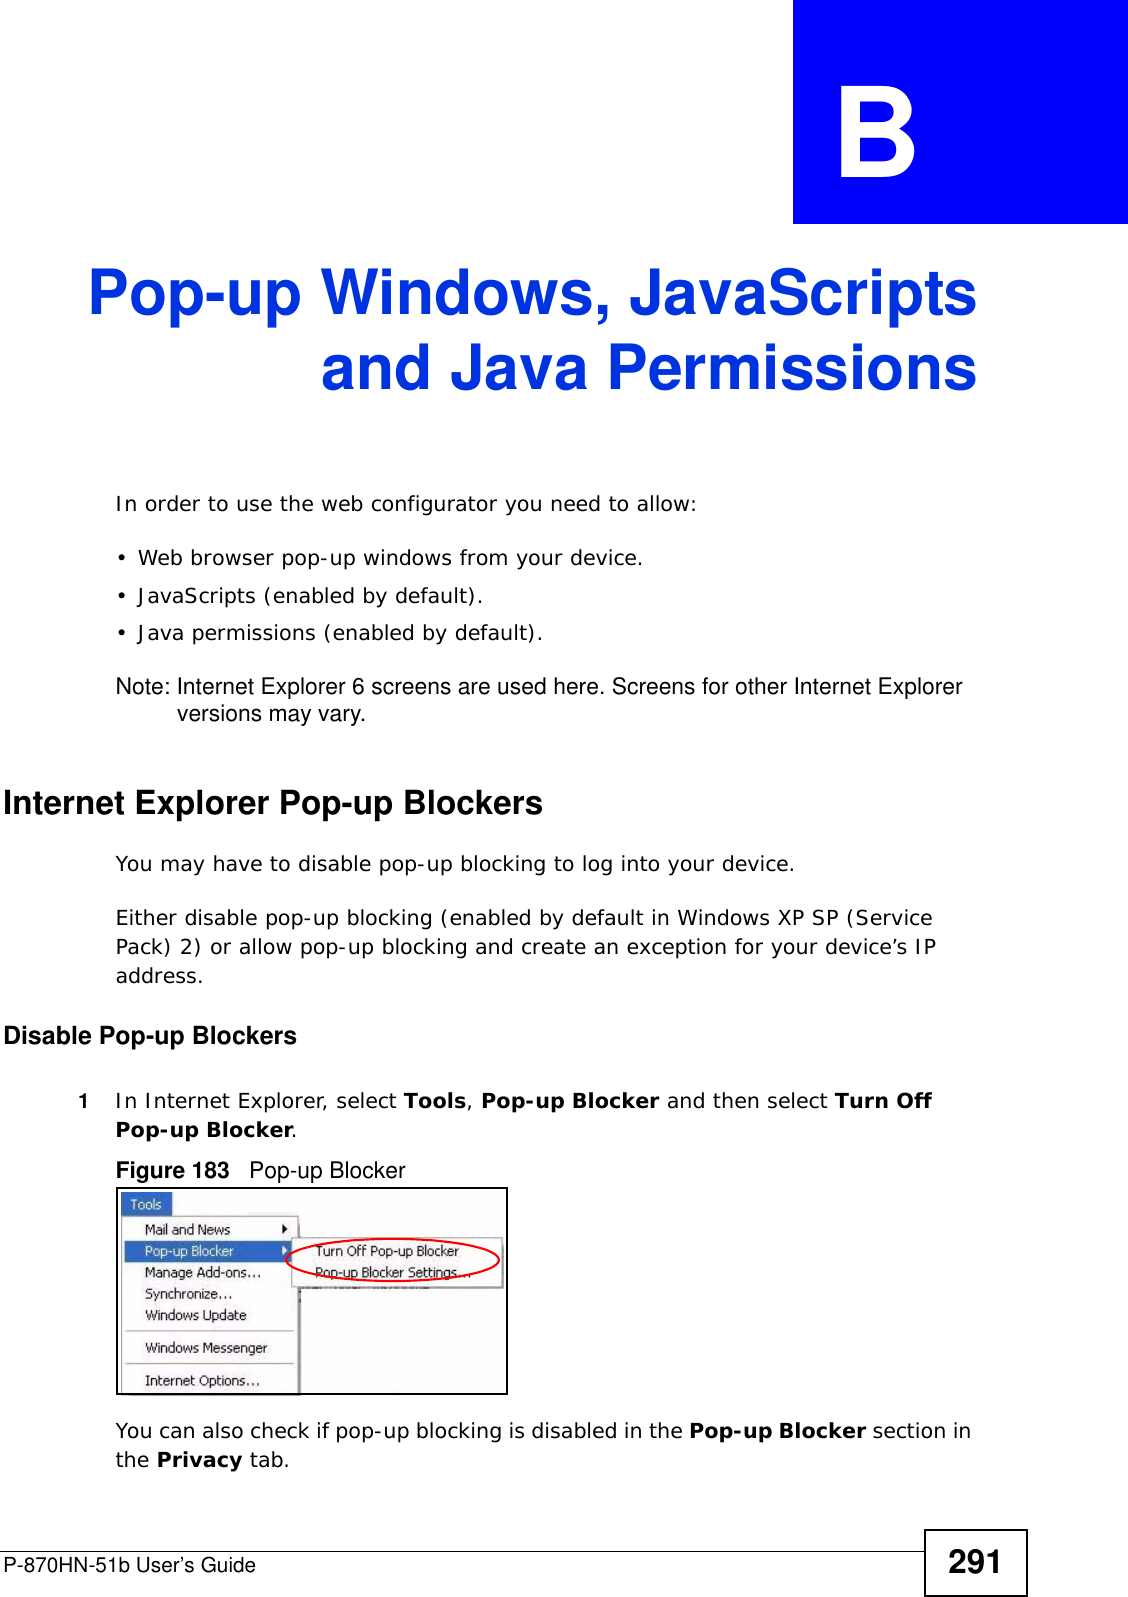 P-870HN-51b User’s Guide 291APPENDIX  B Pop-up Windows, JavaScriptsand Java PermissionsIn order to use the web configurator you need to allow:• Web browser pop-up windows from your device.• JavaScripts (enabled by default).• Java permissions (enabled by default).Note: Internet Explorer 6 screens are used here. Screens for other Internet Explorer versions may vary.Internet Explorer Pop-up BlockersYou may have to disable pop-up blocking to log into your device. Either disable pop-up blocking (enabled by default in Windows XP SP (Service Pack) 2) or allow pop-up blocking and create an exception for your device’s IP address.Disable Pop-up Blockers1In Internet Explorer, select Tools, Pop-up Blocker and then select Turn Off Pop-up Blocker. Figure 183   Pop-up BlockerYou can also check if pop-up blocking is disabled in the Pop-up Blocker section in the Privacy tab. 